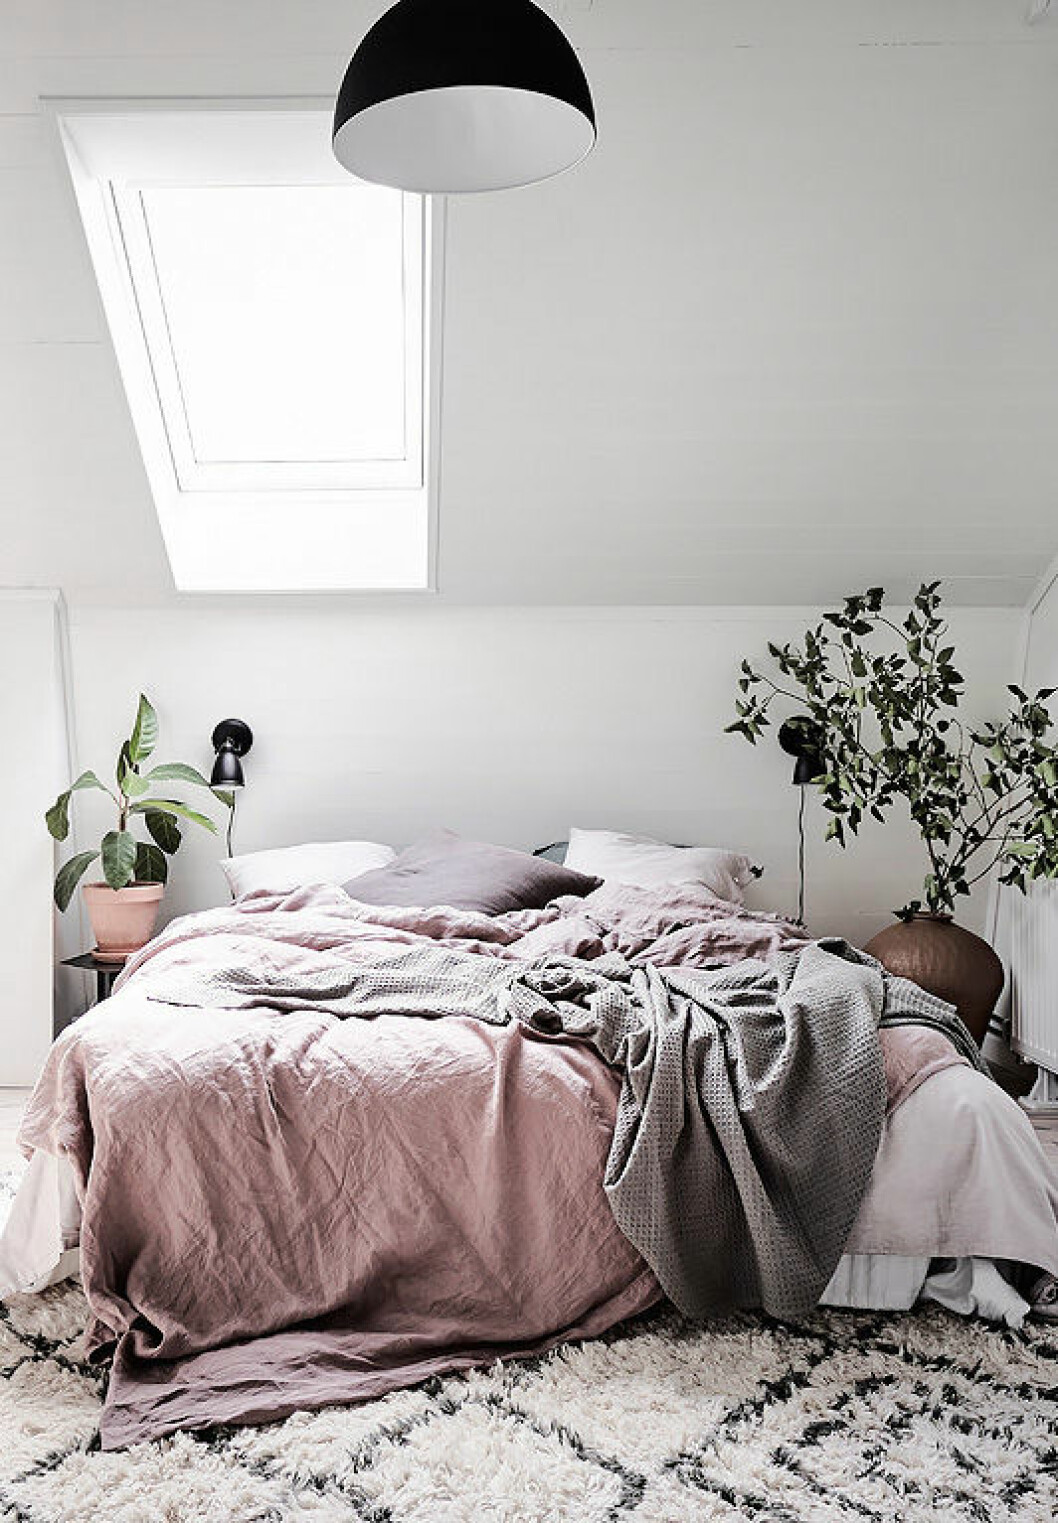 Bedroom with pink linen and green plants.